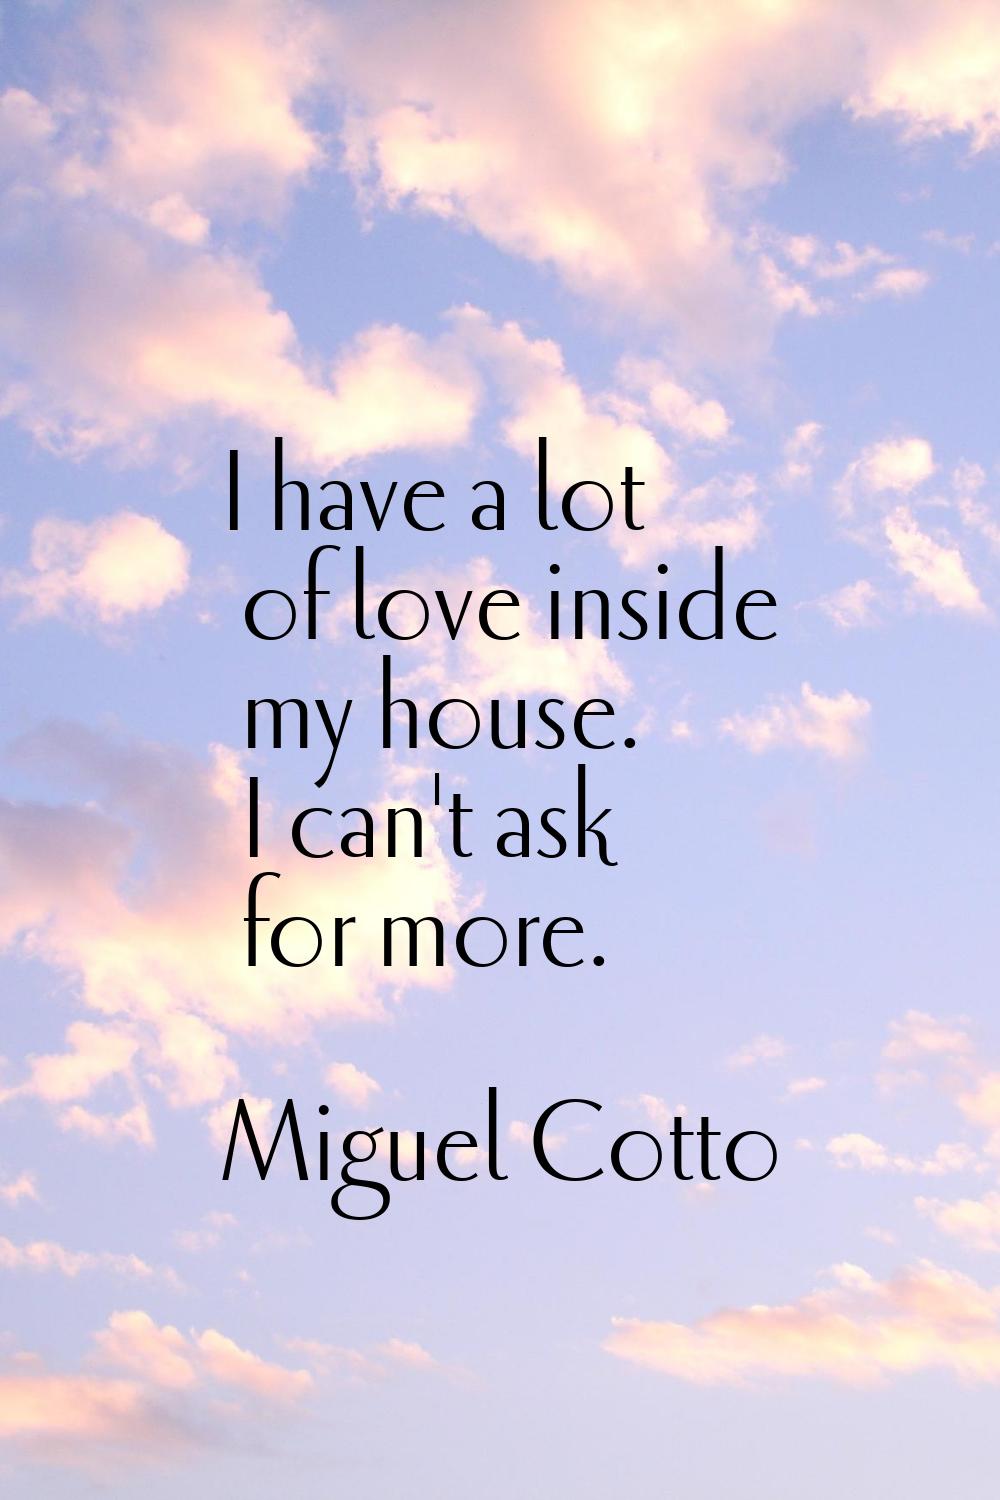 I have a lot of love inside my house. I can't ask for more.